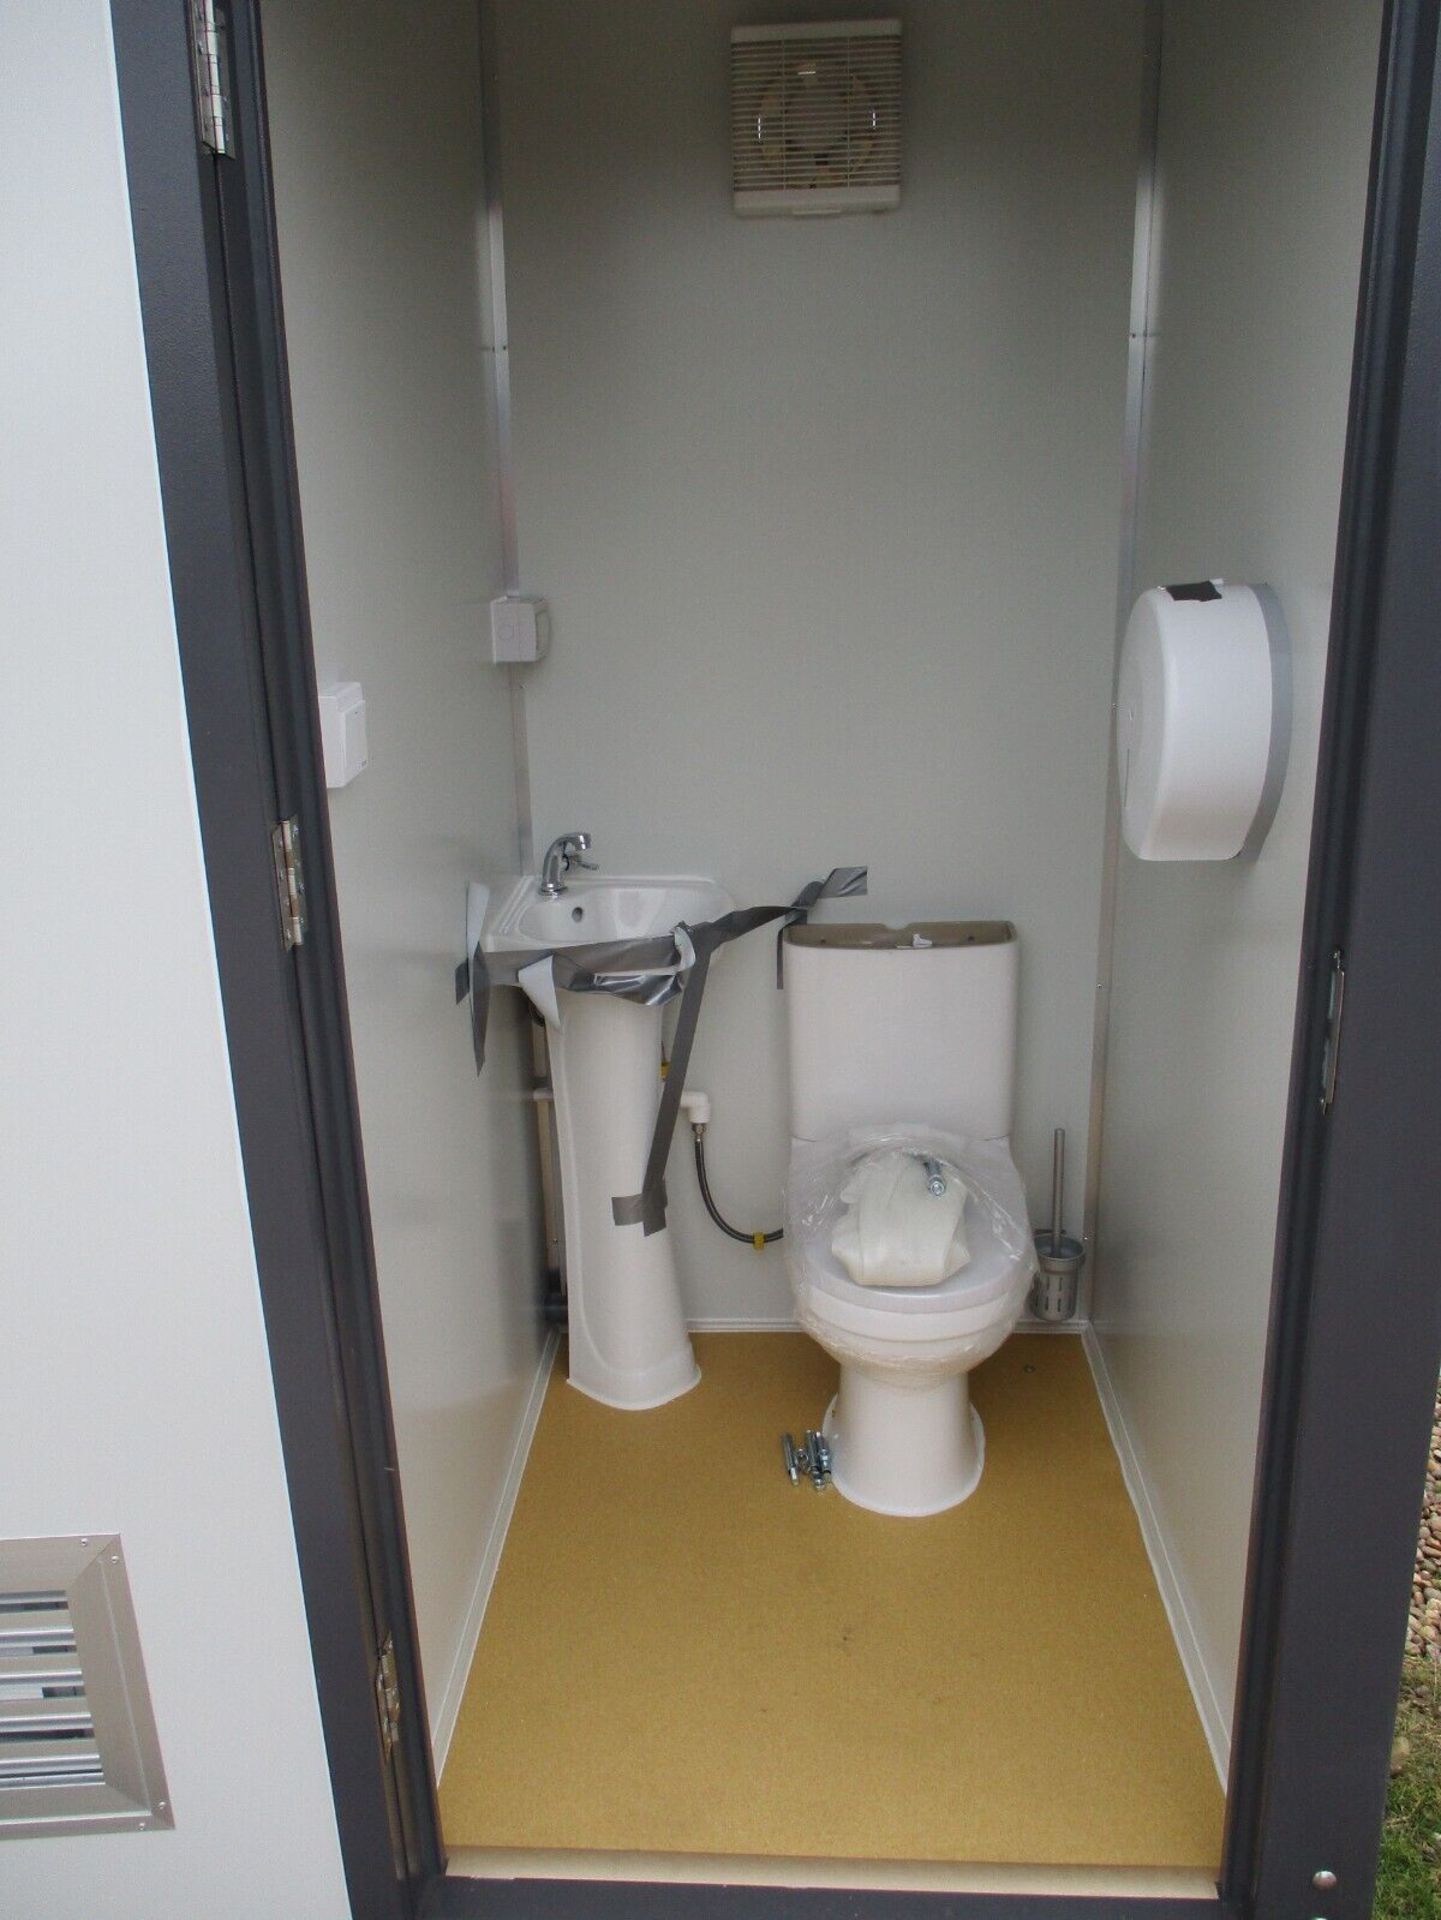 COMPACT COMFORT: 2.15M X 1.3M SHIPPING CONTAINER TOILET OASIS - Image 4 of 9